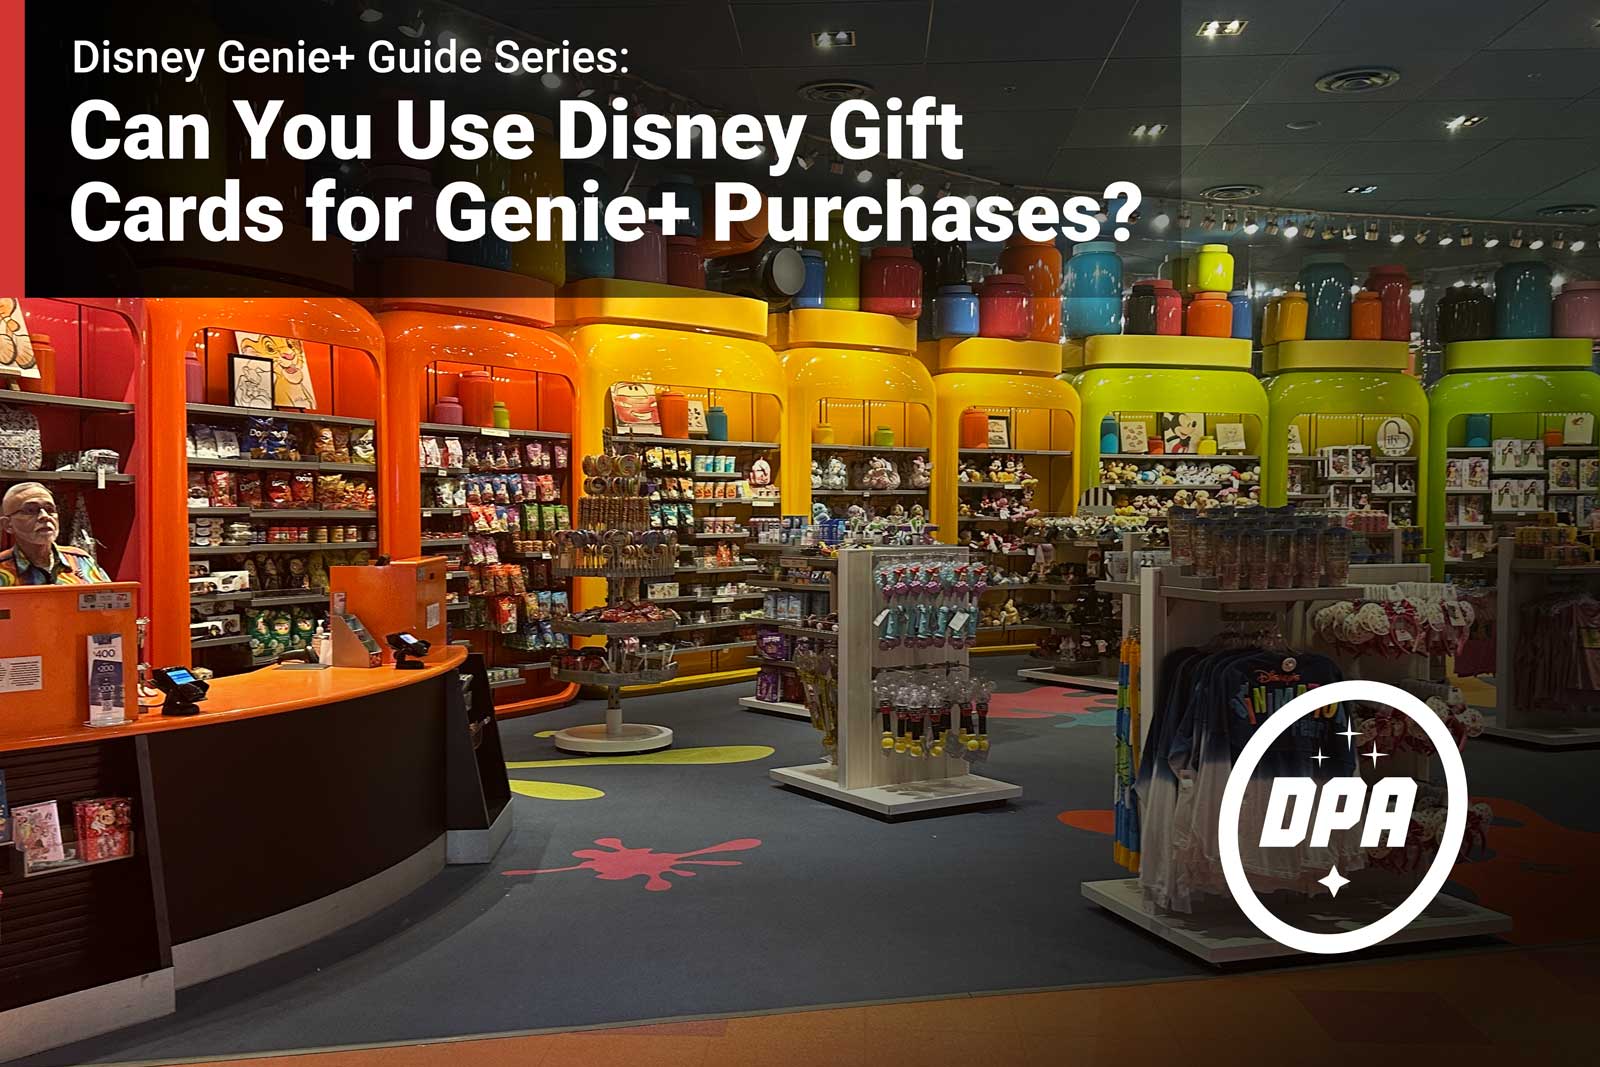 Can You Use Disney Gift Cards for Genie+ Purchases?